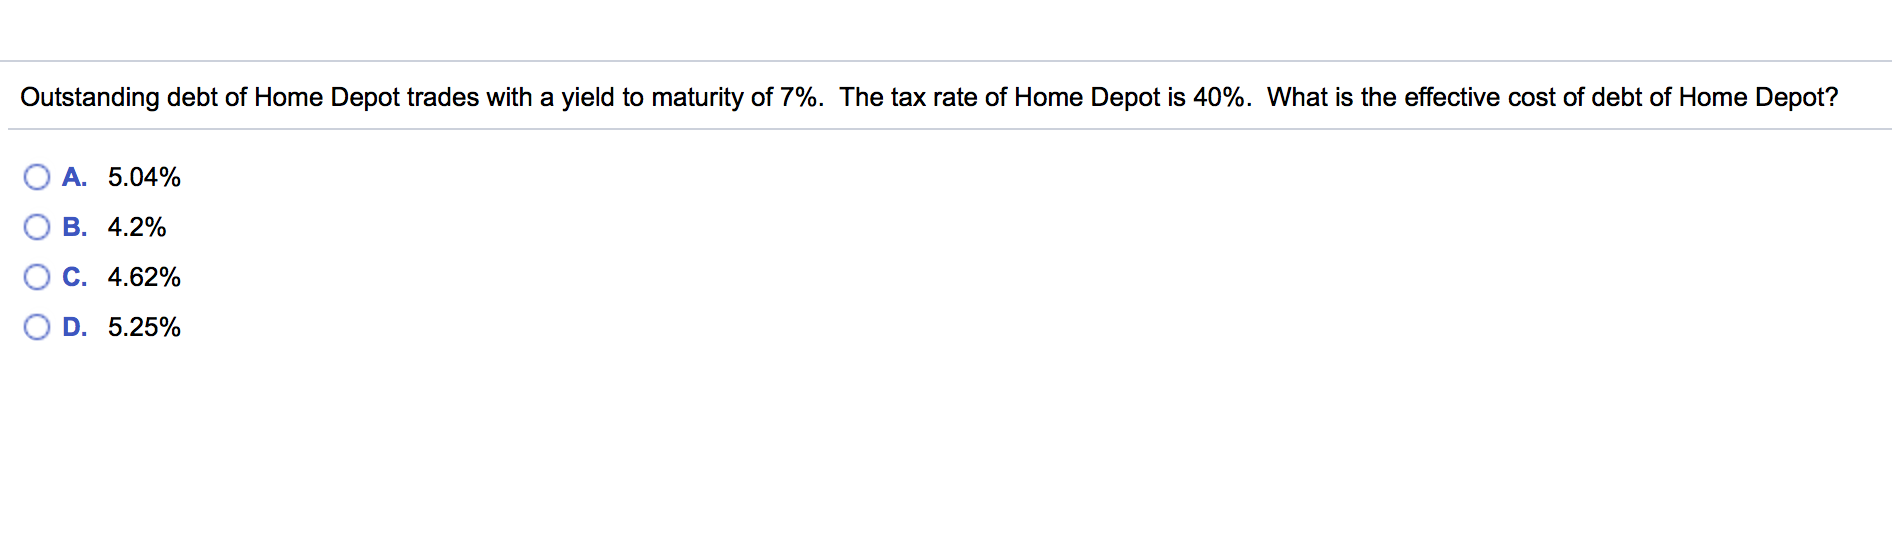 Outstanding debt of Home Depot trades with a yield to maturity of 7%. The tax rate of Home Depot is 40%. What is the effective cost of debt of Home Depot?
A. 5.04%
B. 4.2%
C. 4.62%
D. 5.25%
